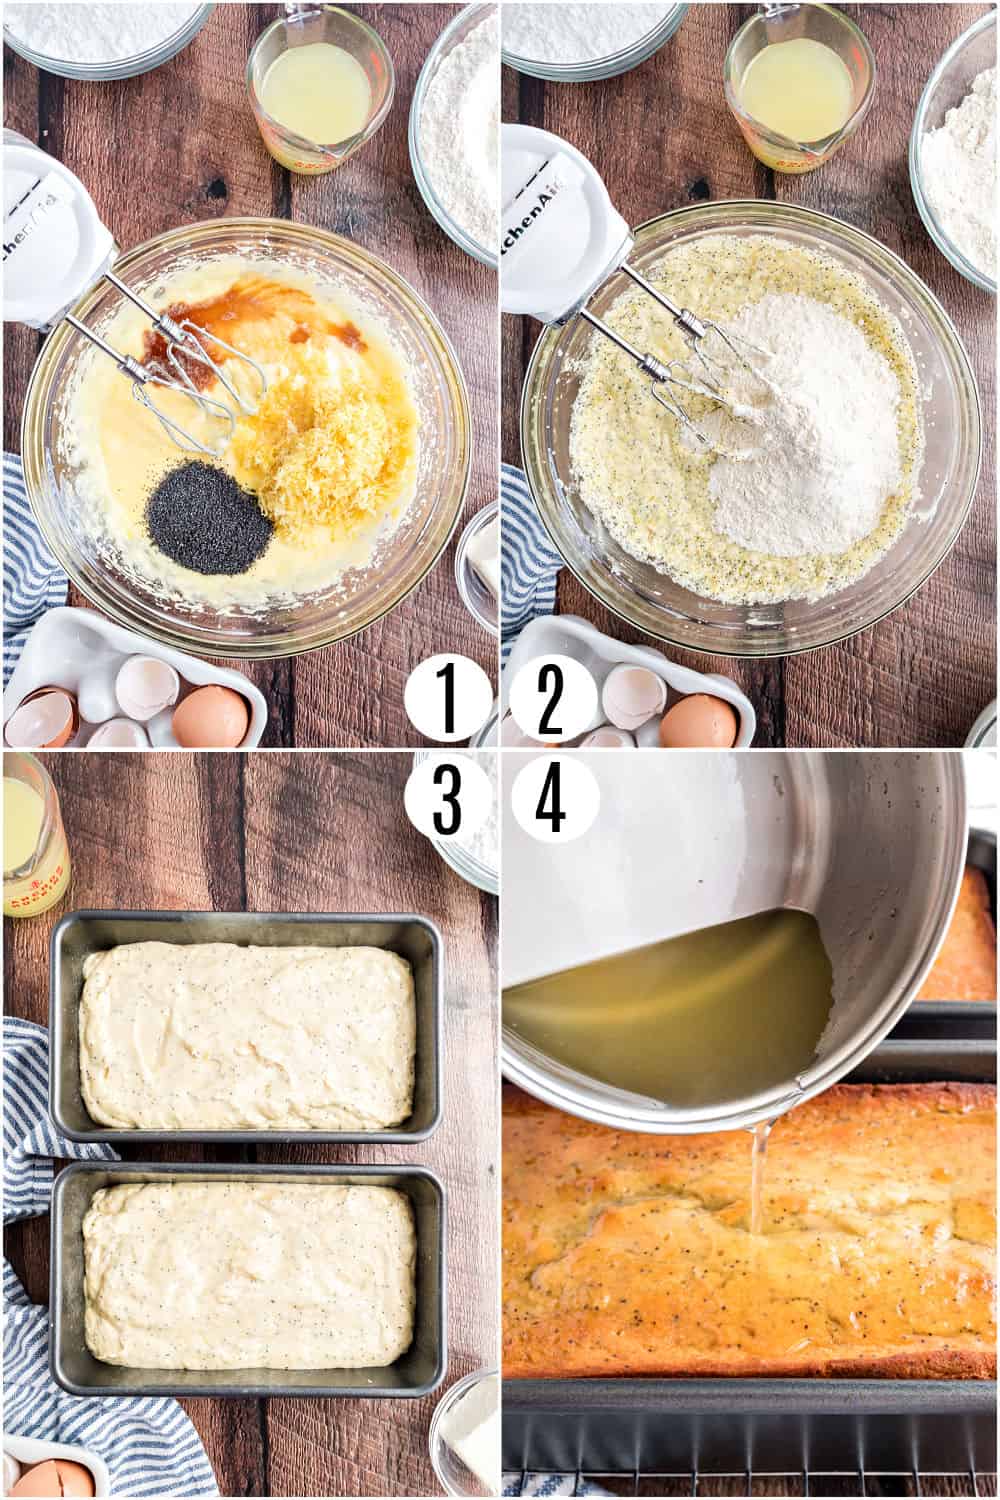 Step by step photos showing how to make lemon poppy seed bread.